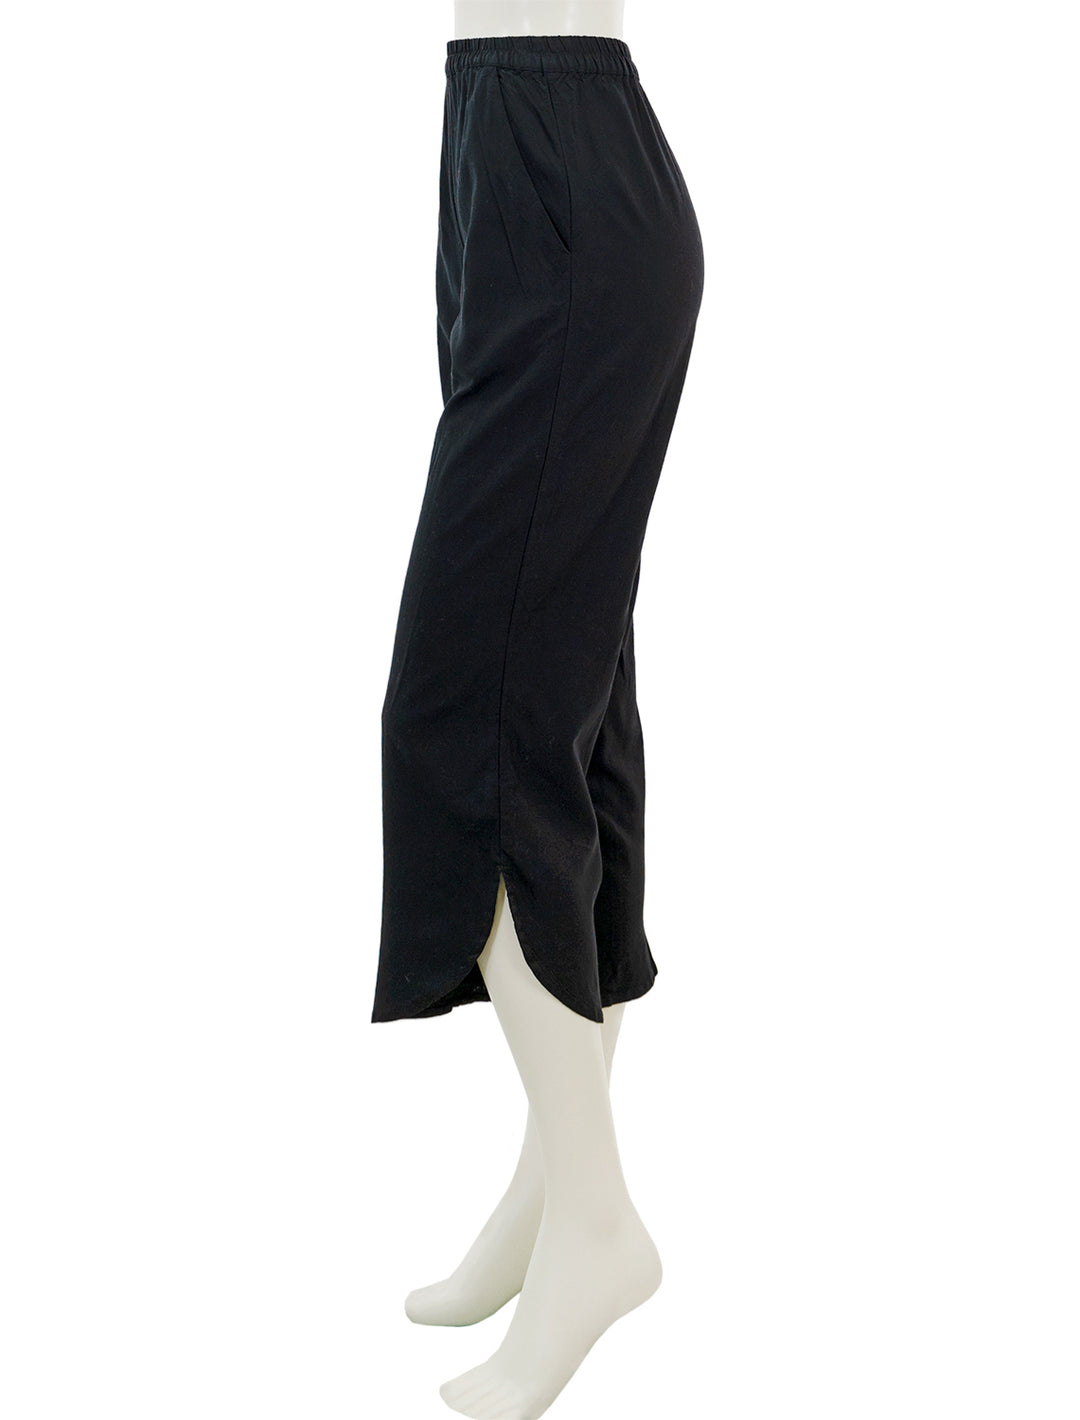 Side view of Marine Layer's wide leg allison pant in black.